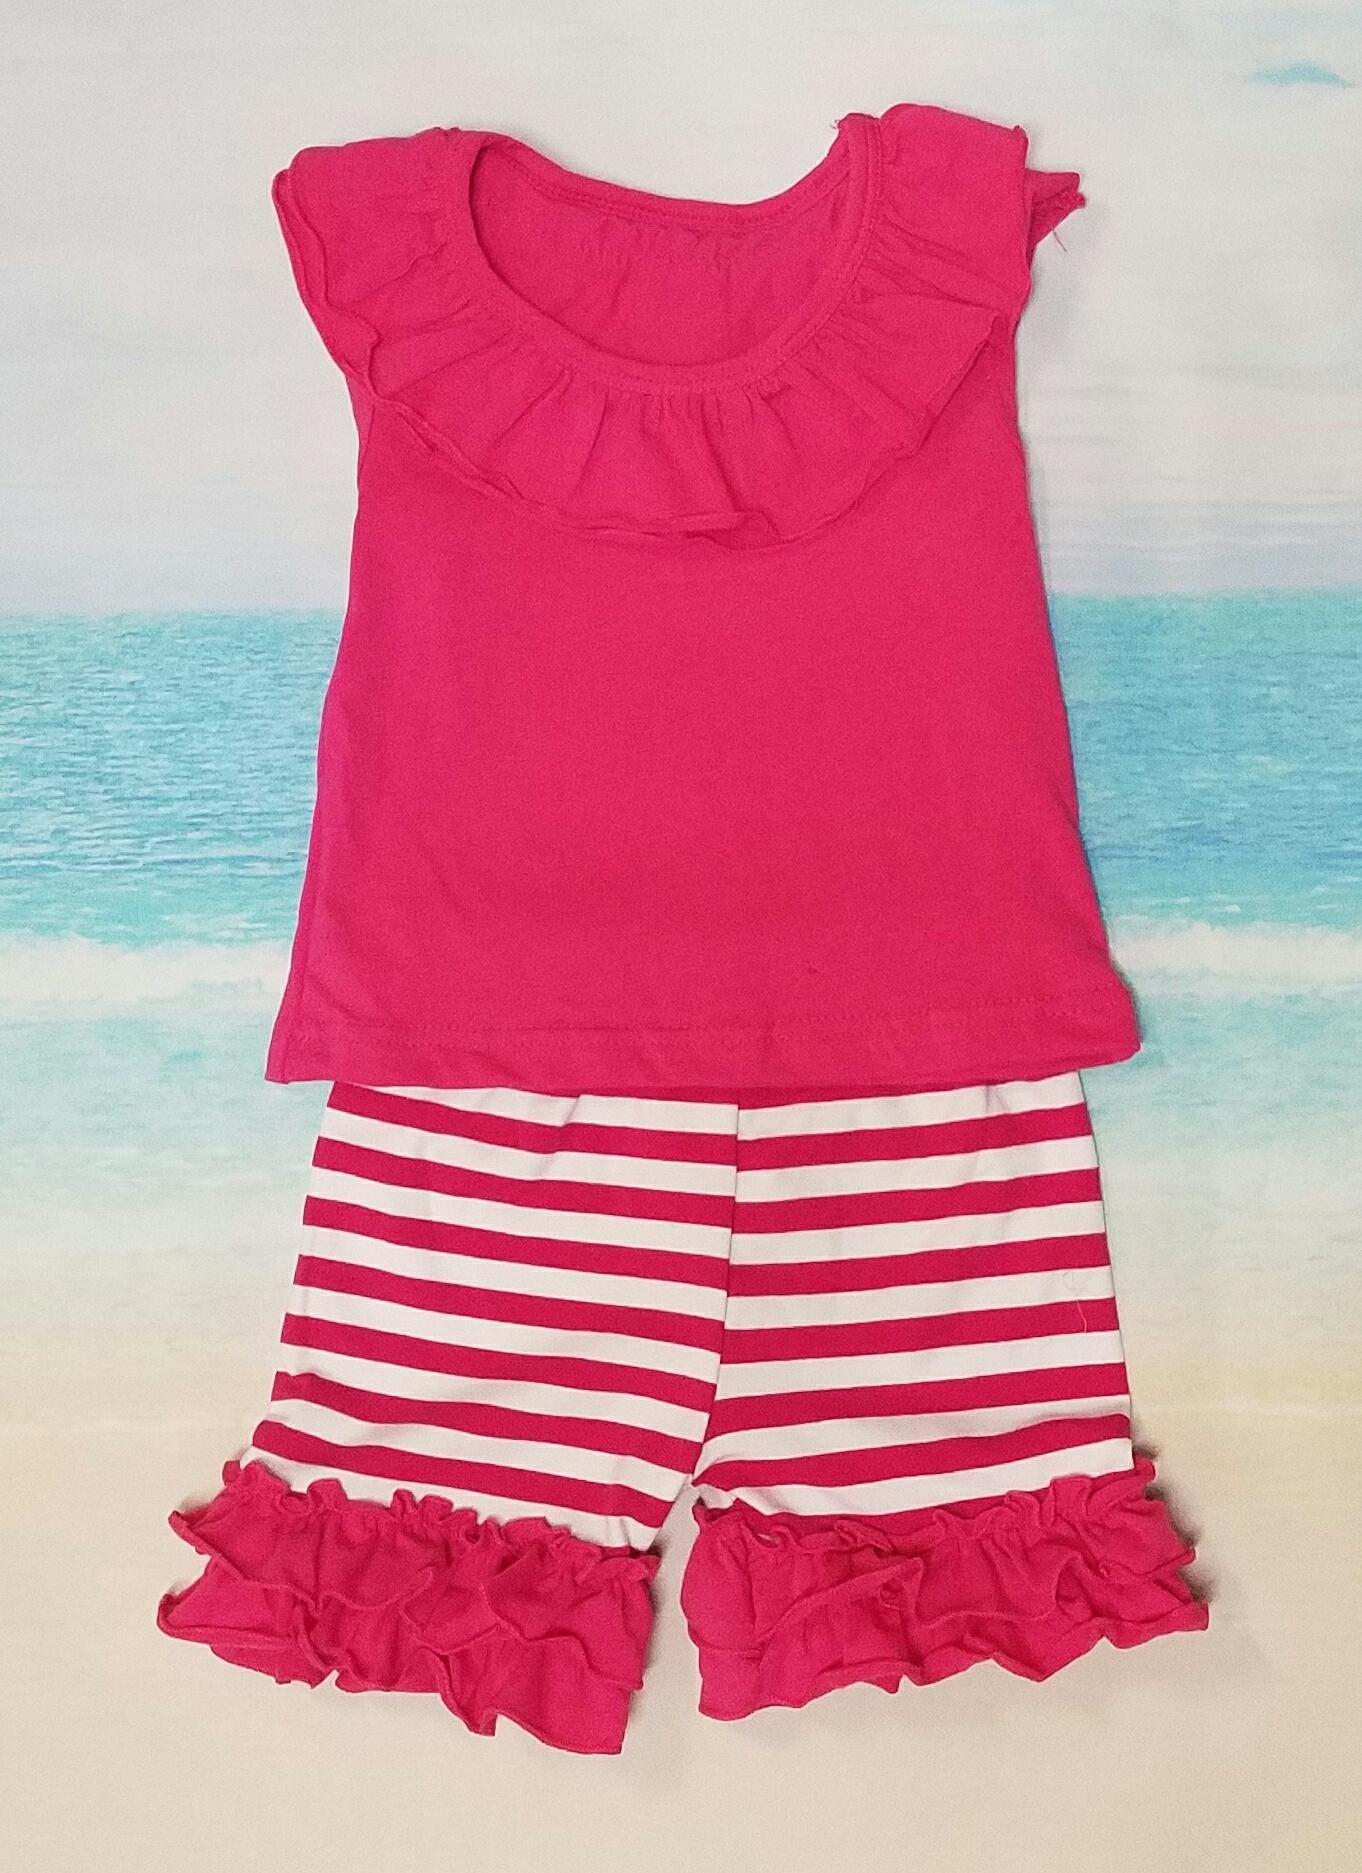 Pink Ruffle Shorts Set - Momma G's Children's Boutique, Screen Printing, Embroidery & More